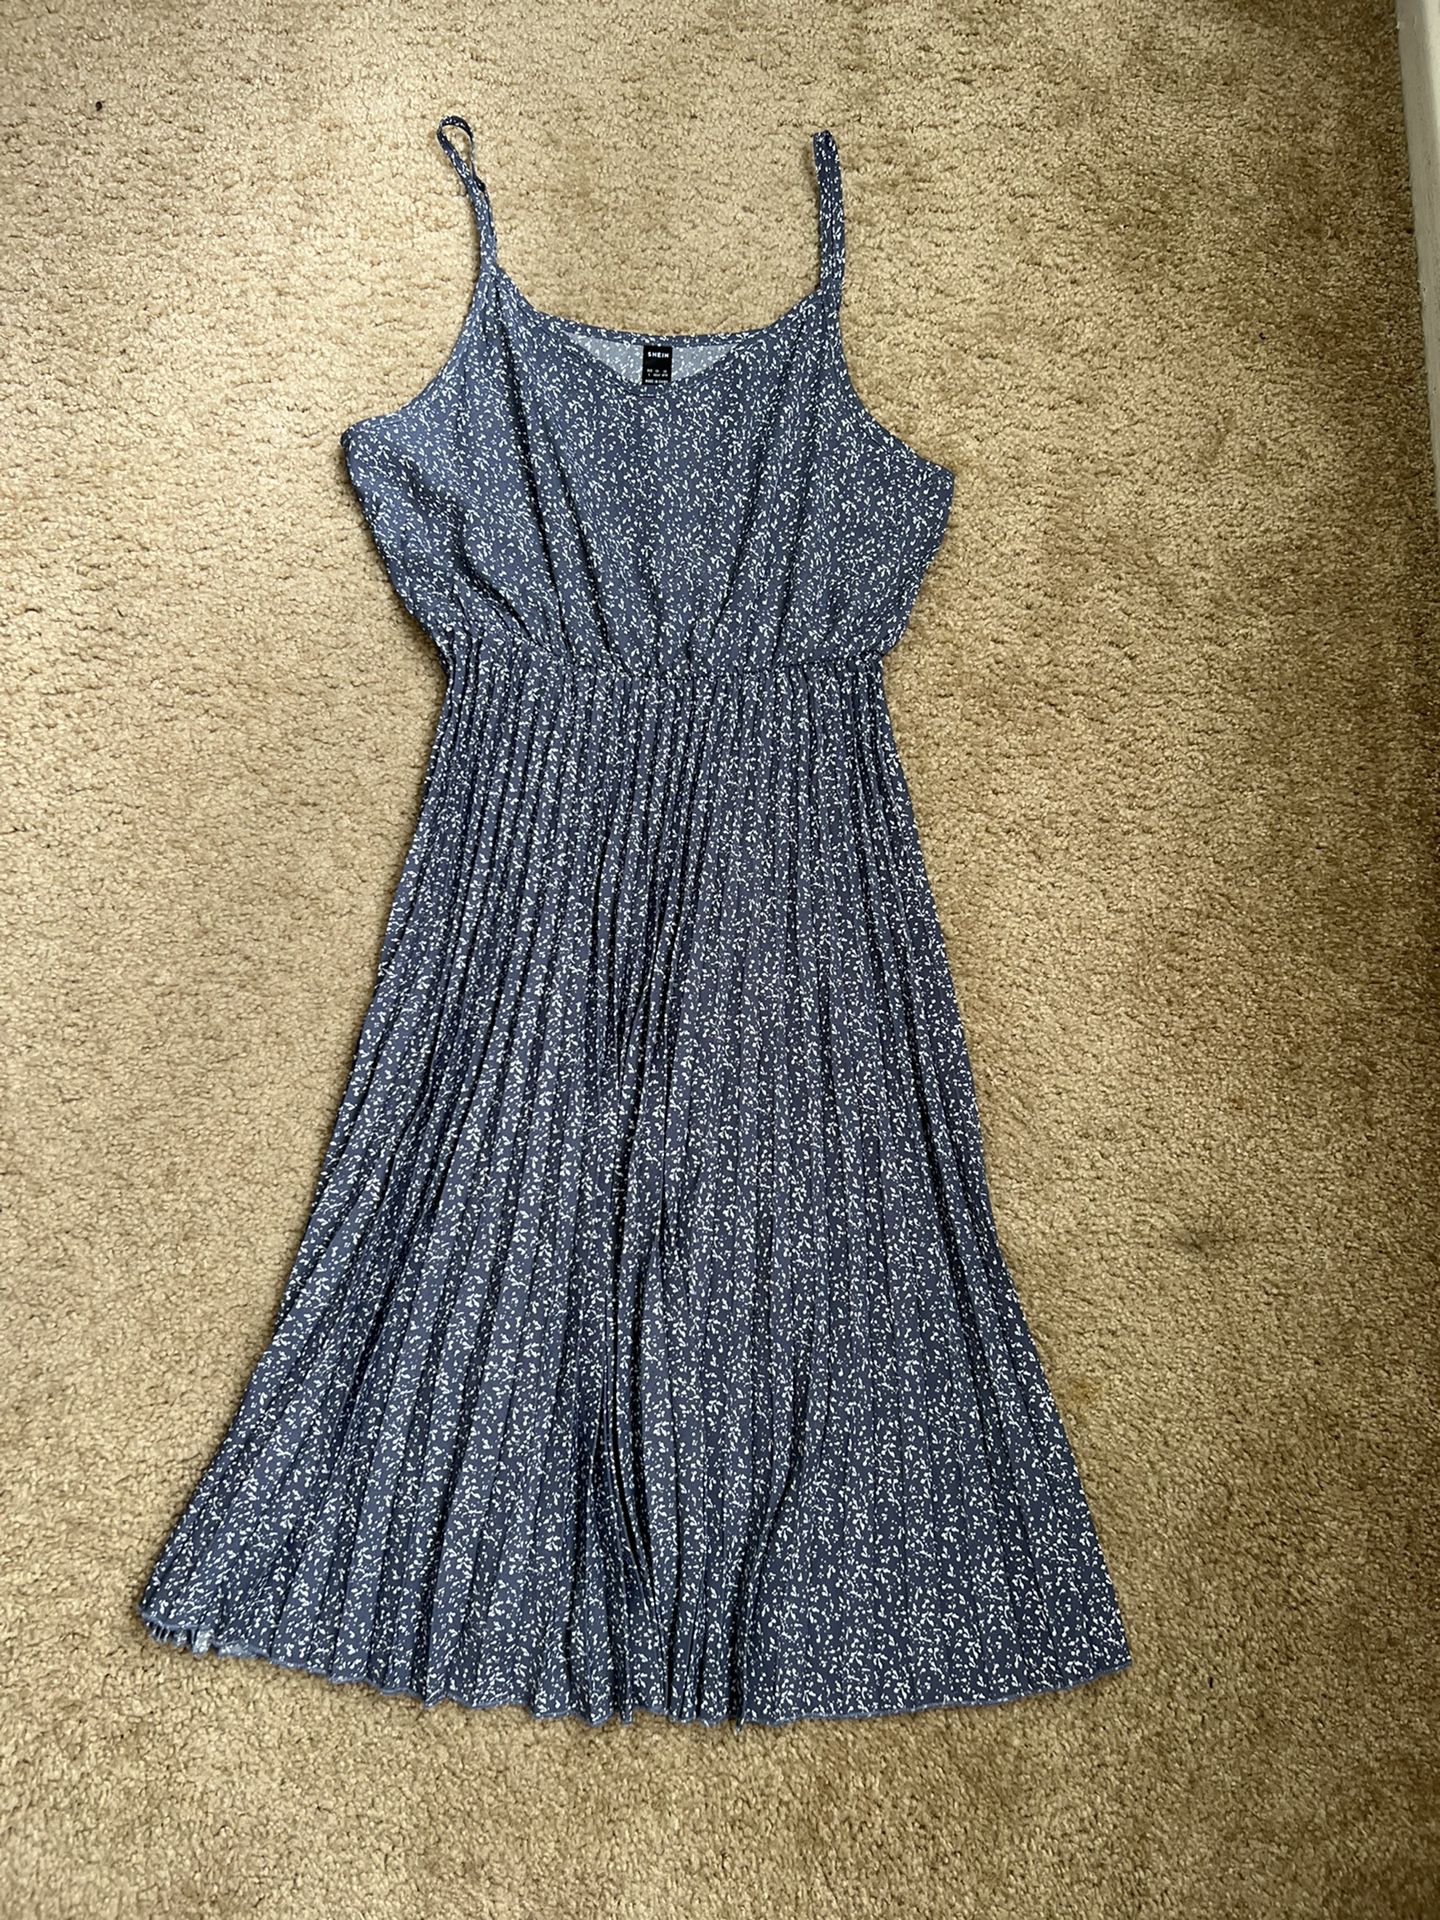 SHEIN Sundress Navy Blue And White Floral Size Large